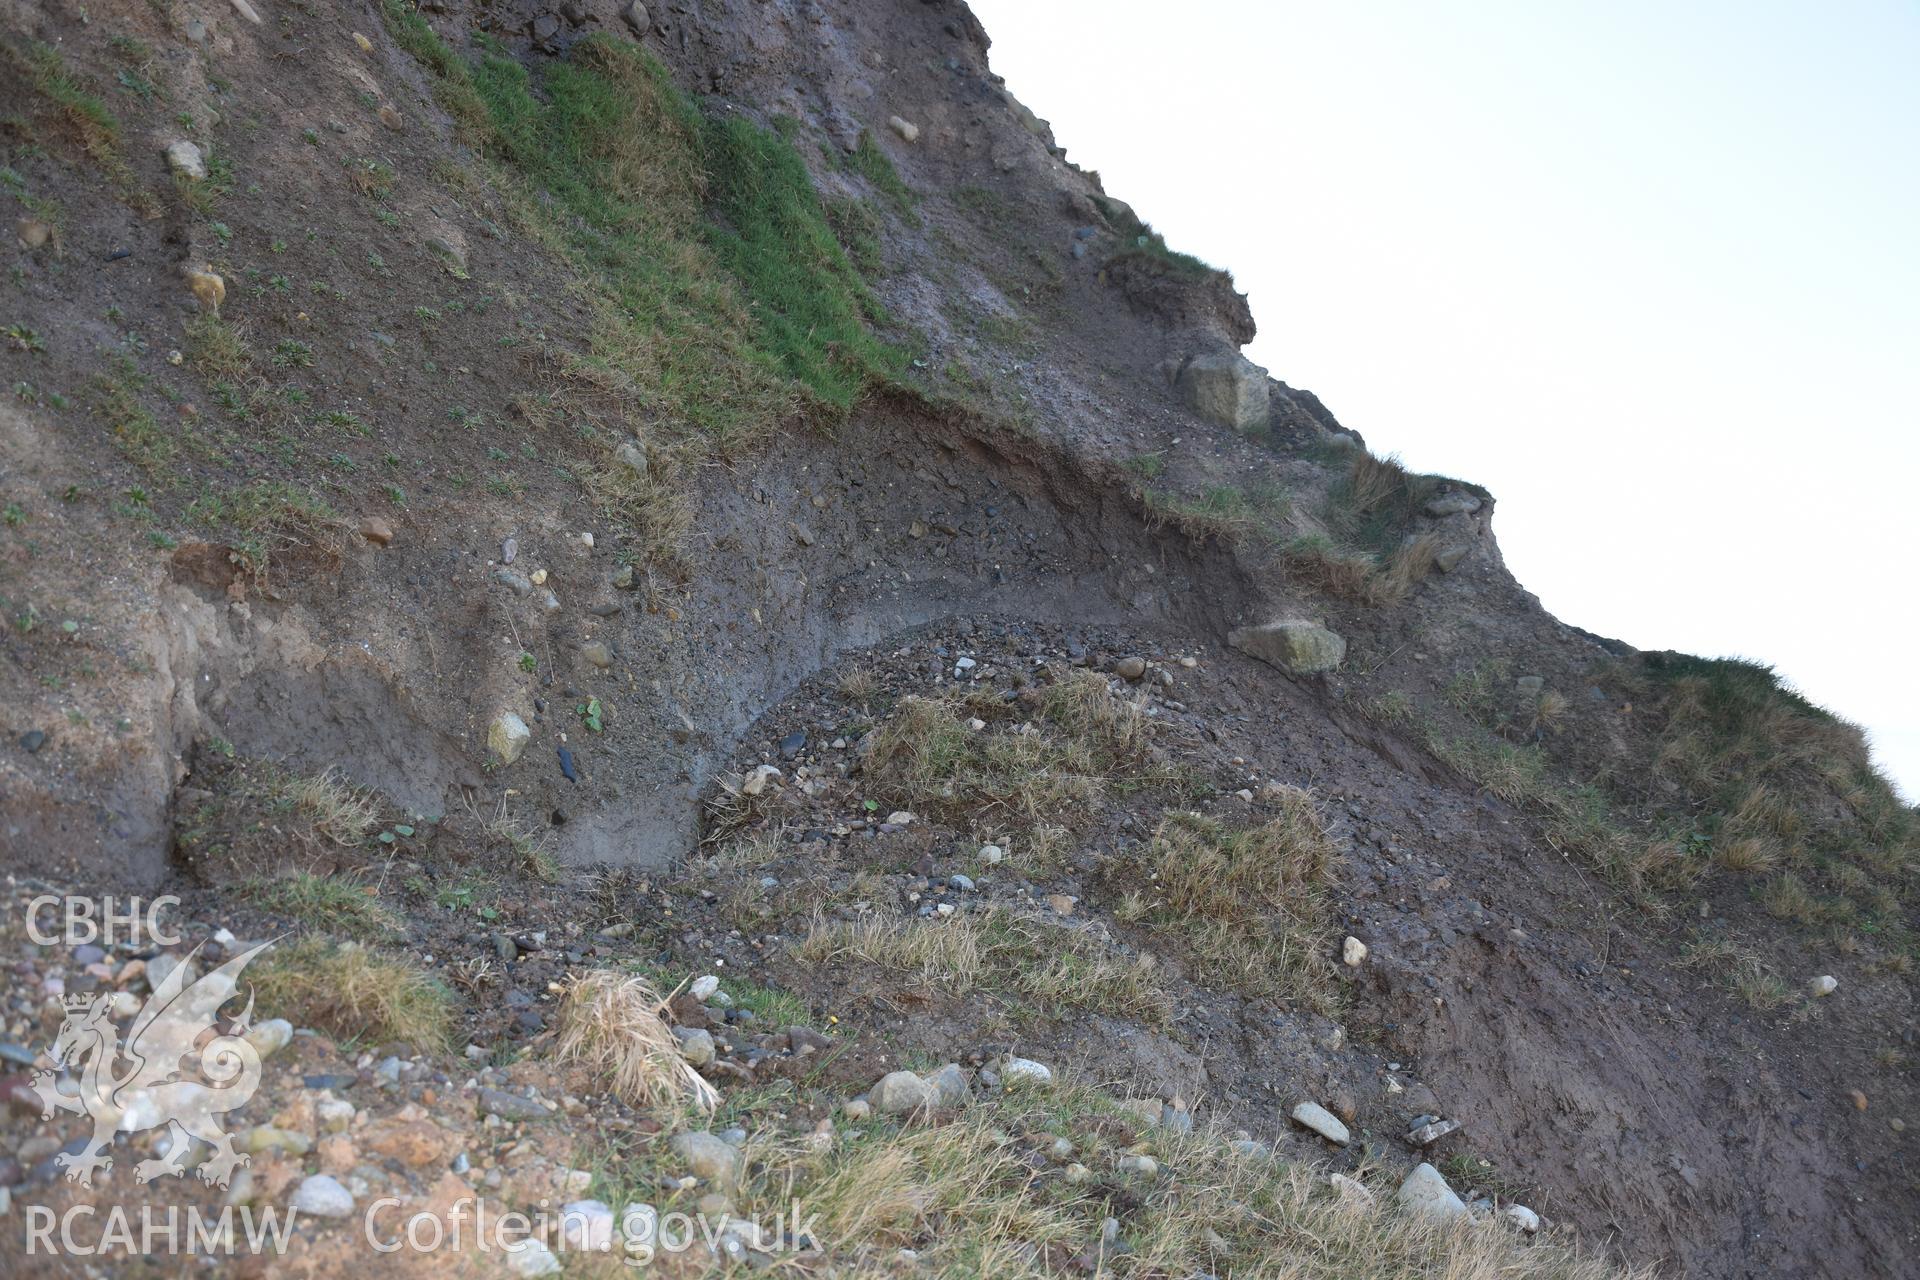 Close up shot of a collapsed area of sediment. Taken by Toby Driver. Produced with EU funds through the Ireland Wales Co-operation Programme 2014-2023. All material made freely available through the Open Government Licence.